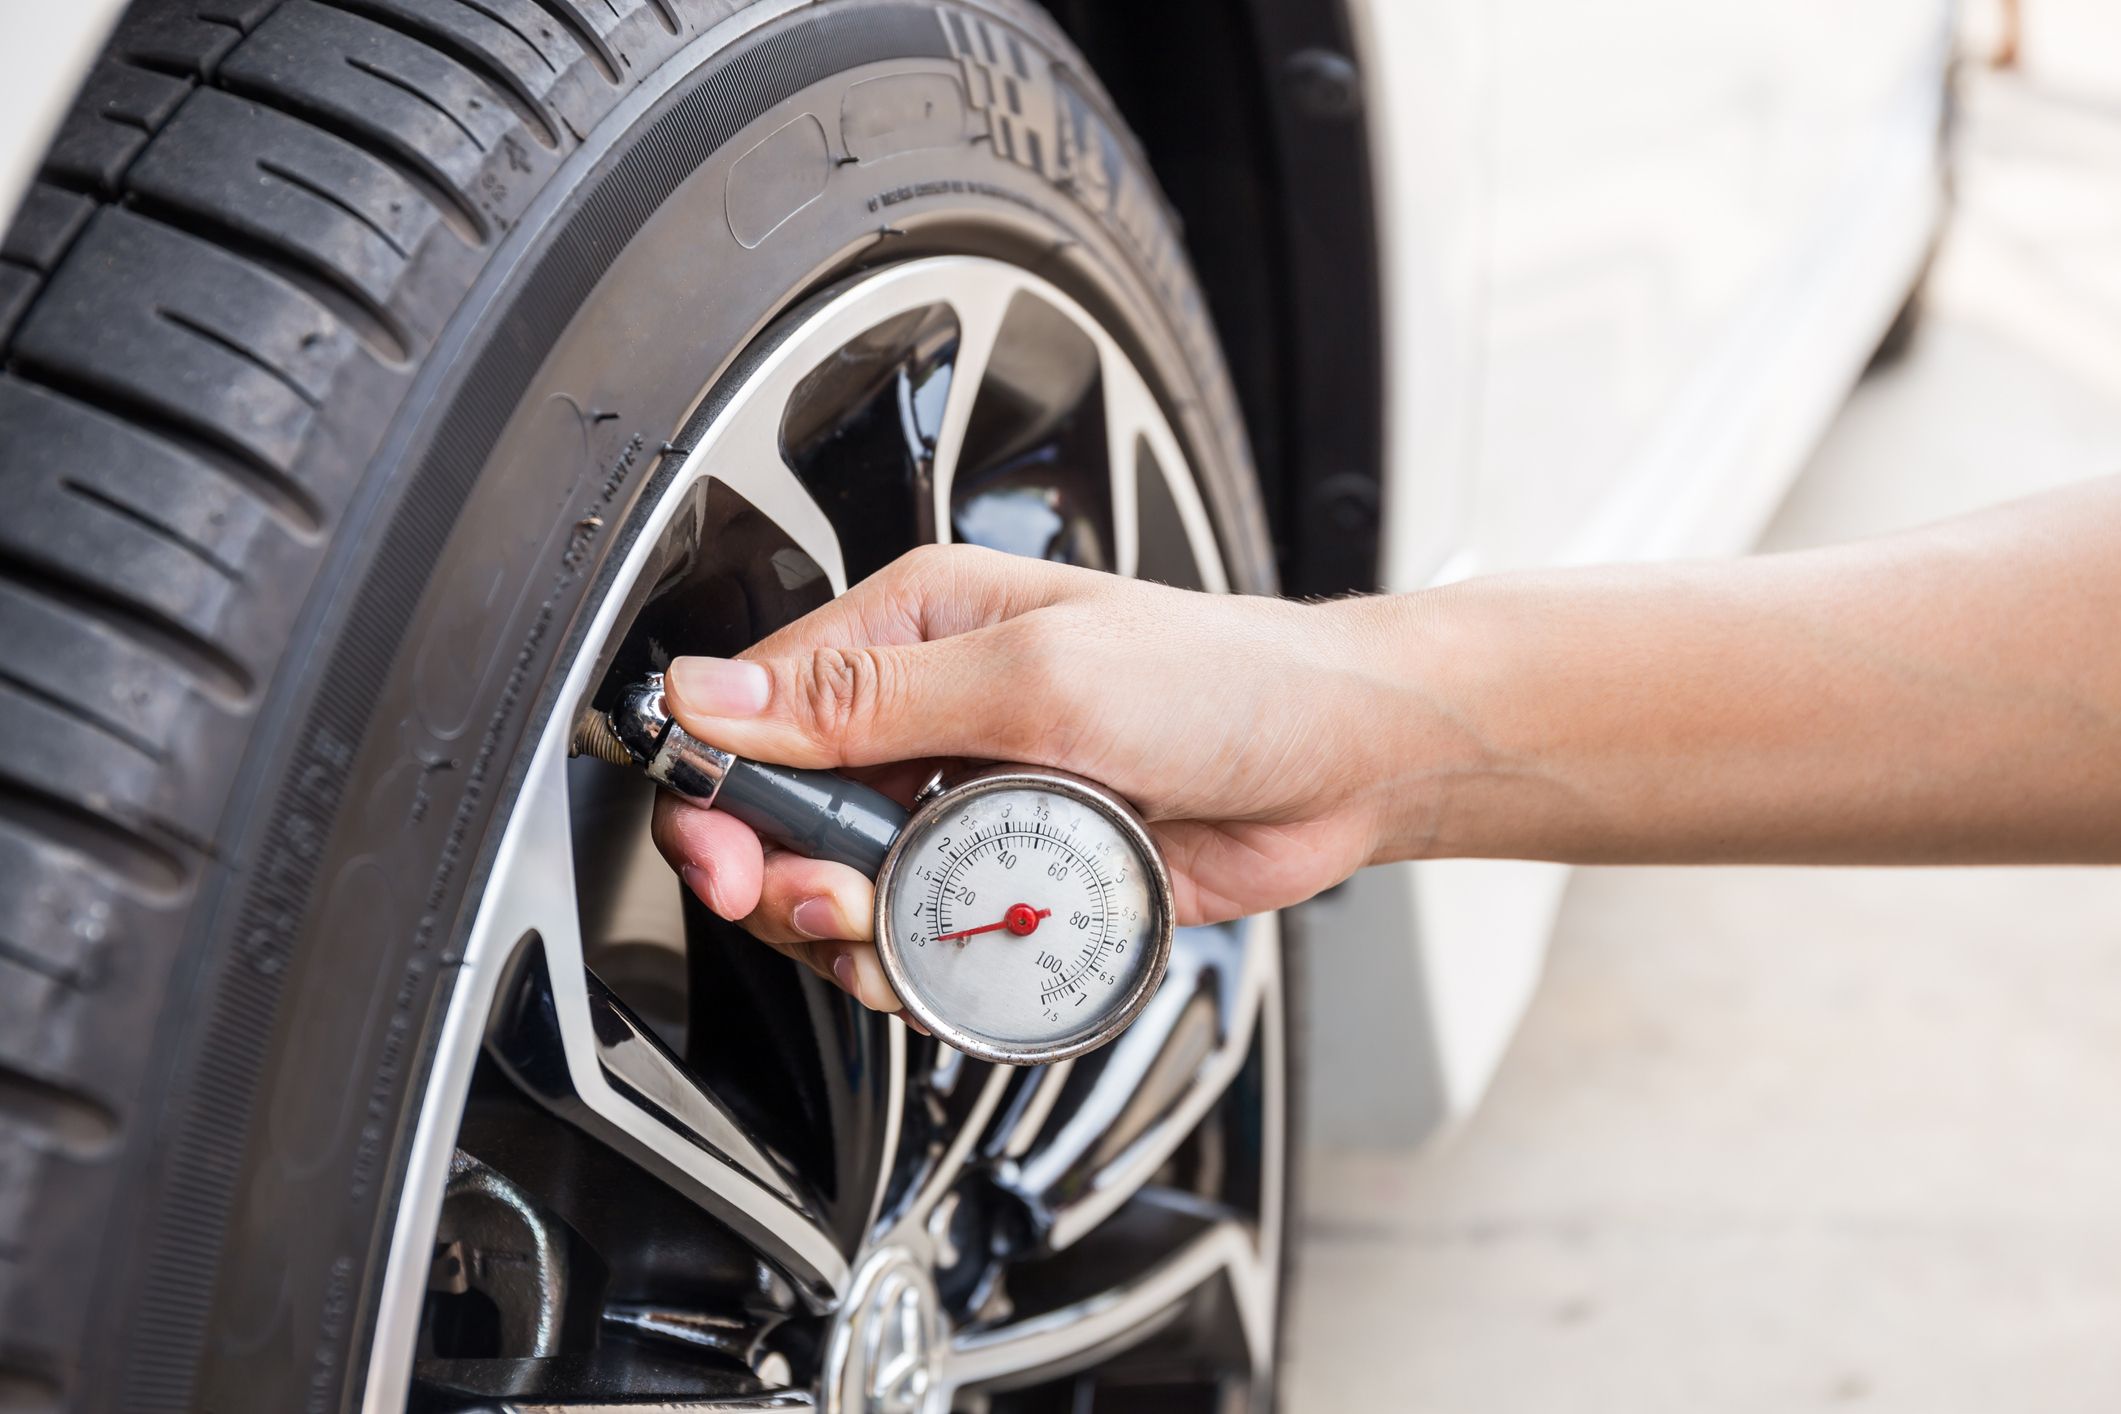 Tire Pressure Sensors: How Do They Work?